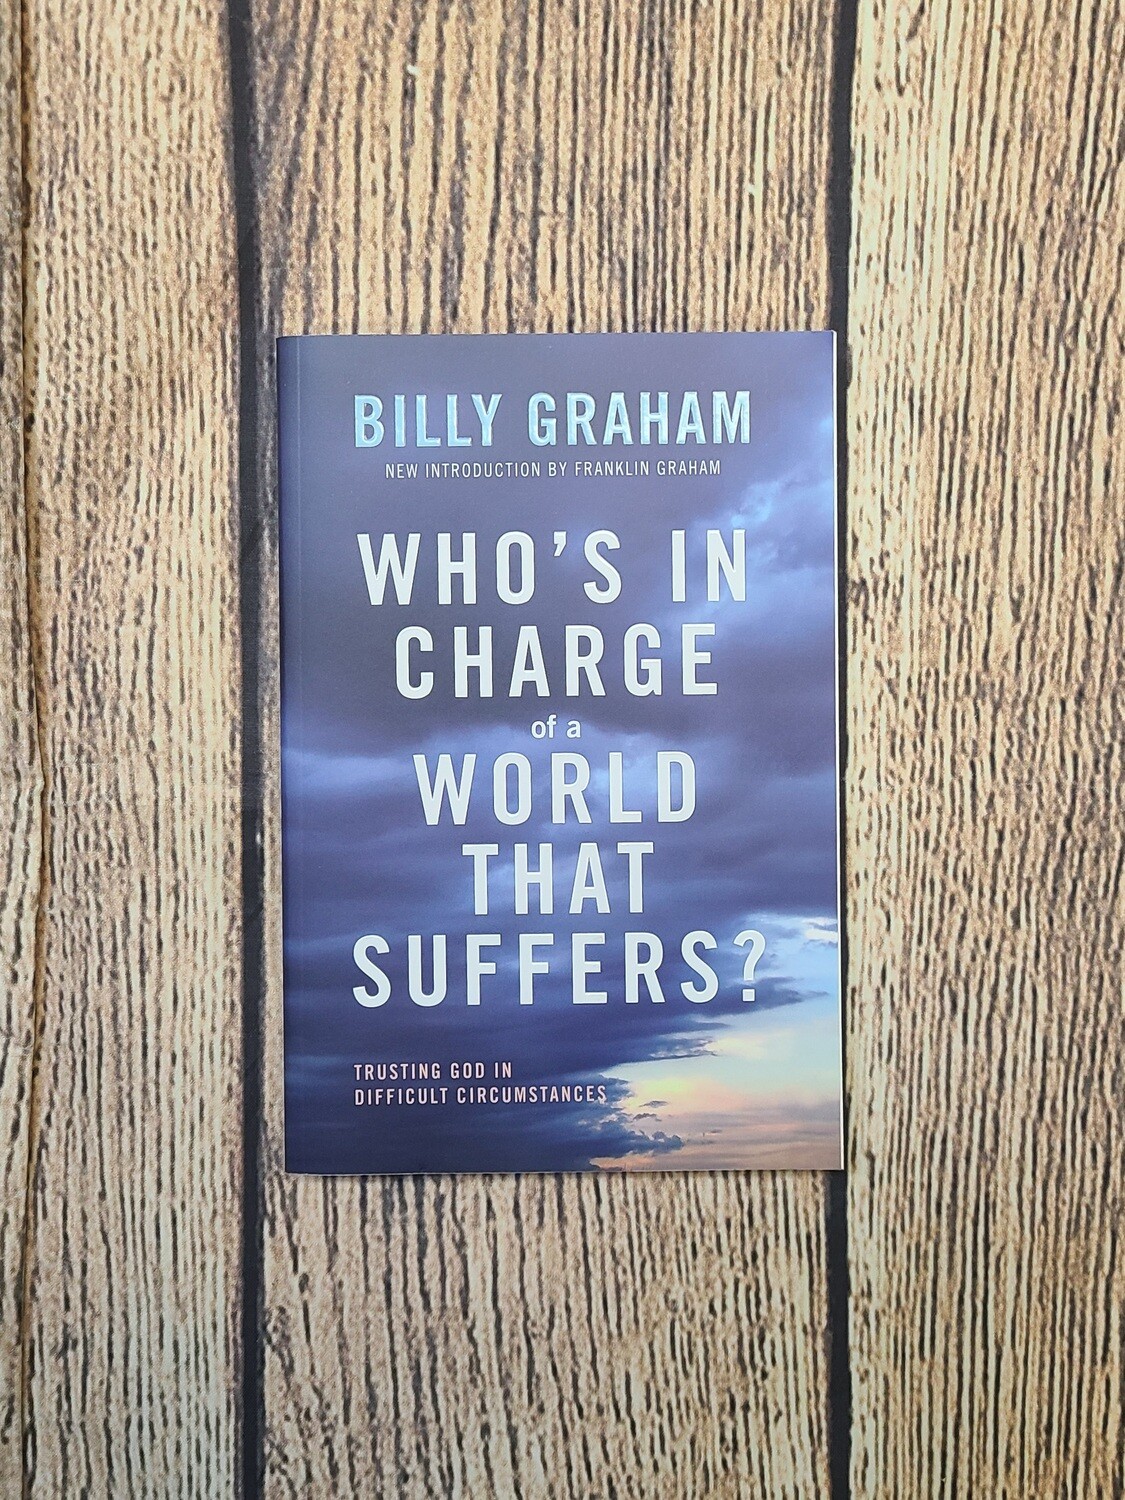 Who's in Charge of a World that Suffers?: Trusting God in Difficult Circumstances by Billy Graham